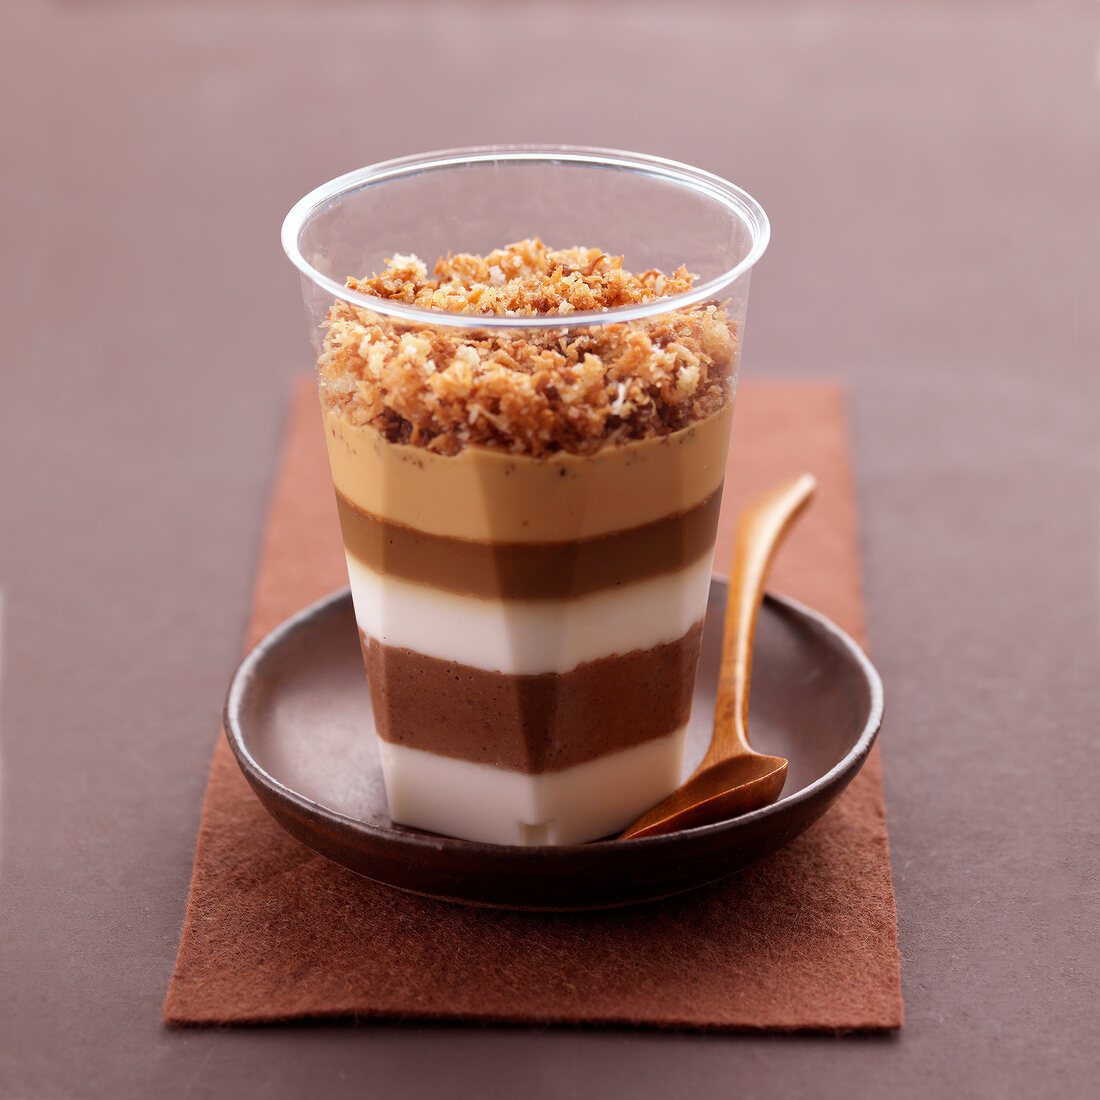 Crumble-style chocolate and coconut Panacotta